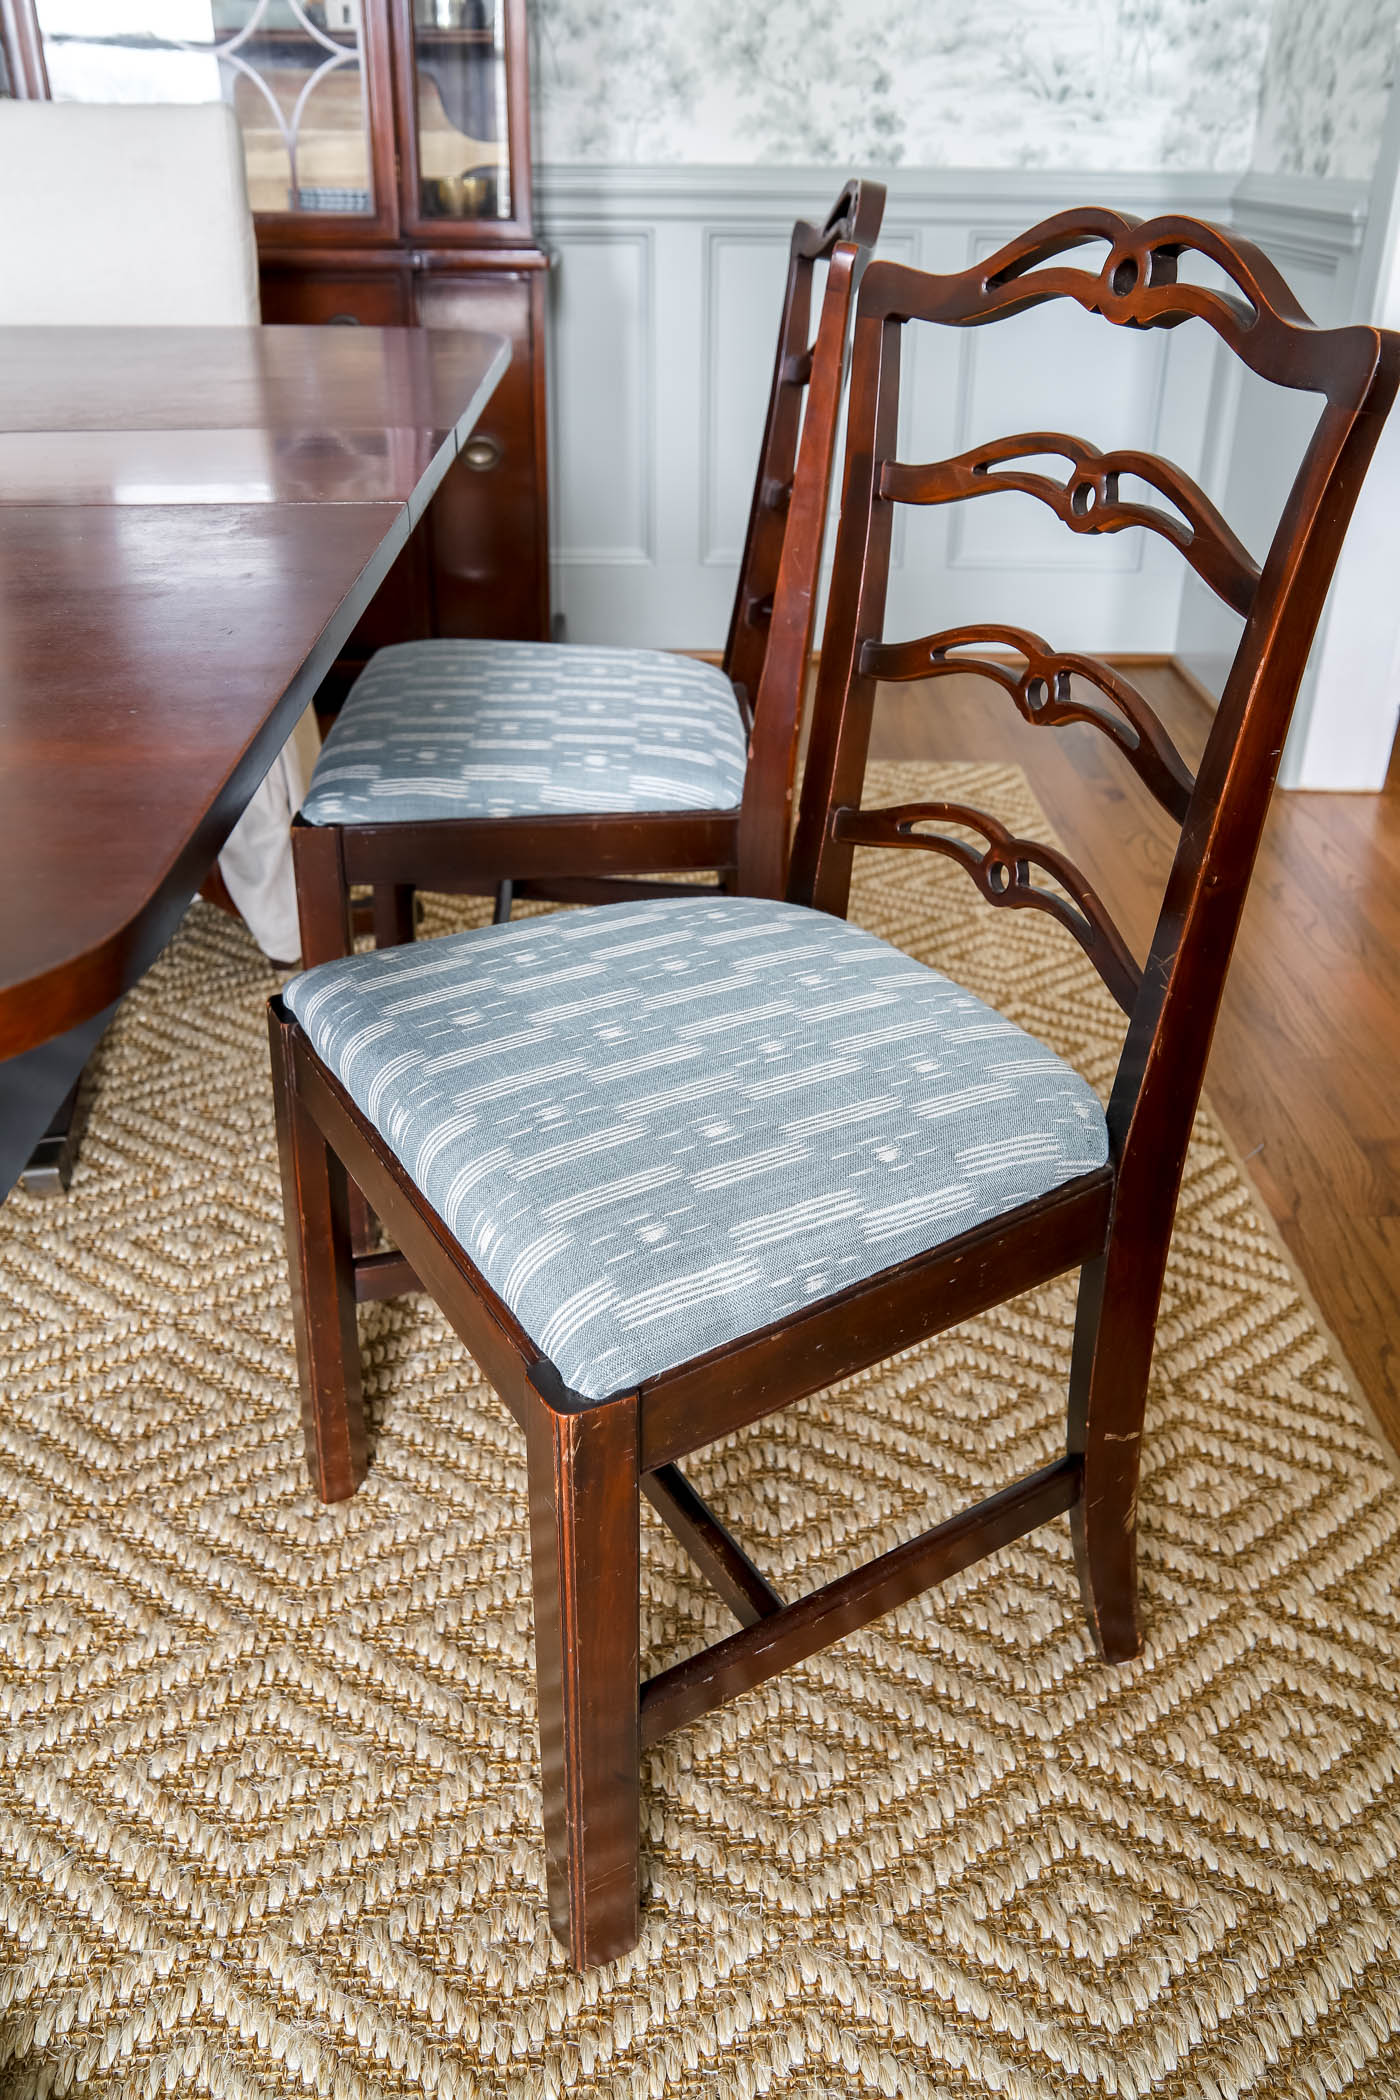 How to Reupholster Dining Chair Covers